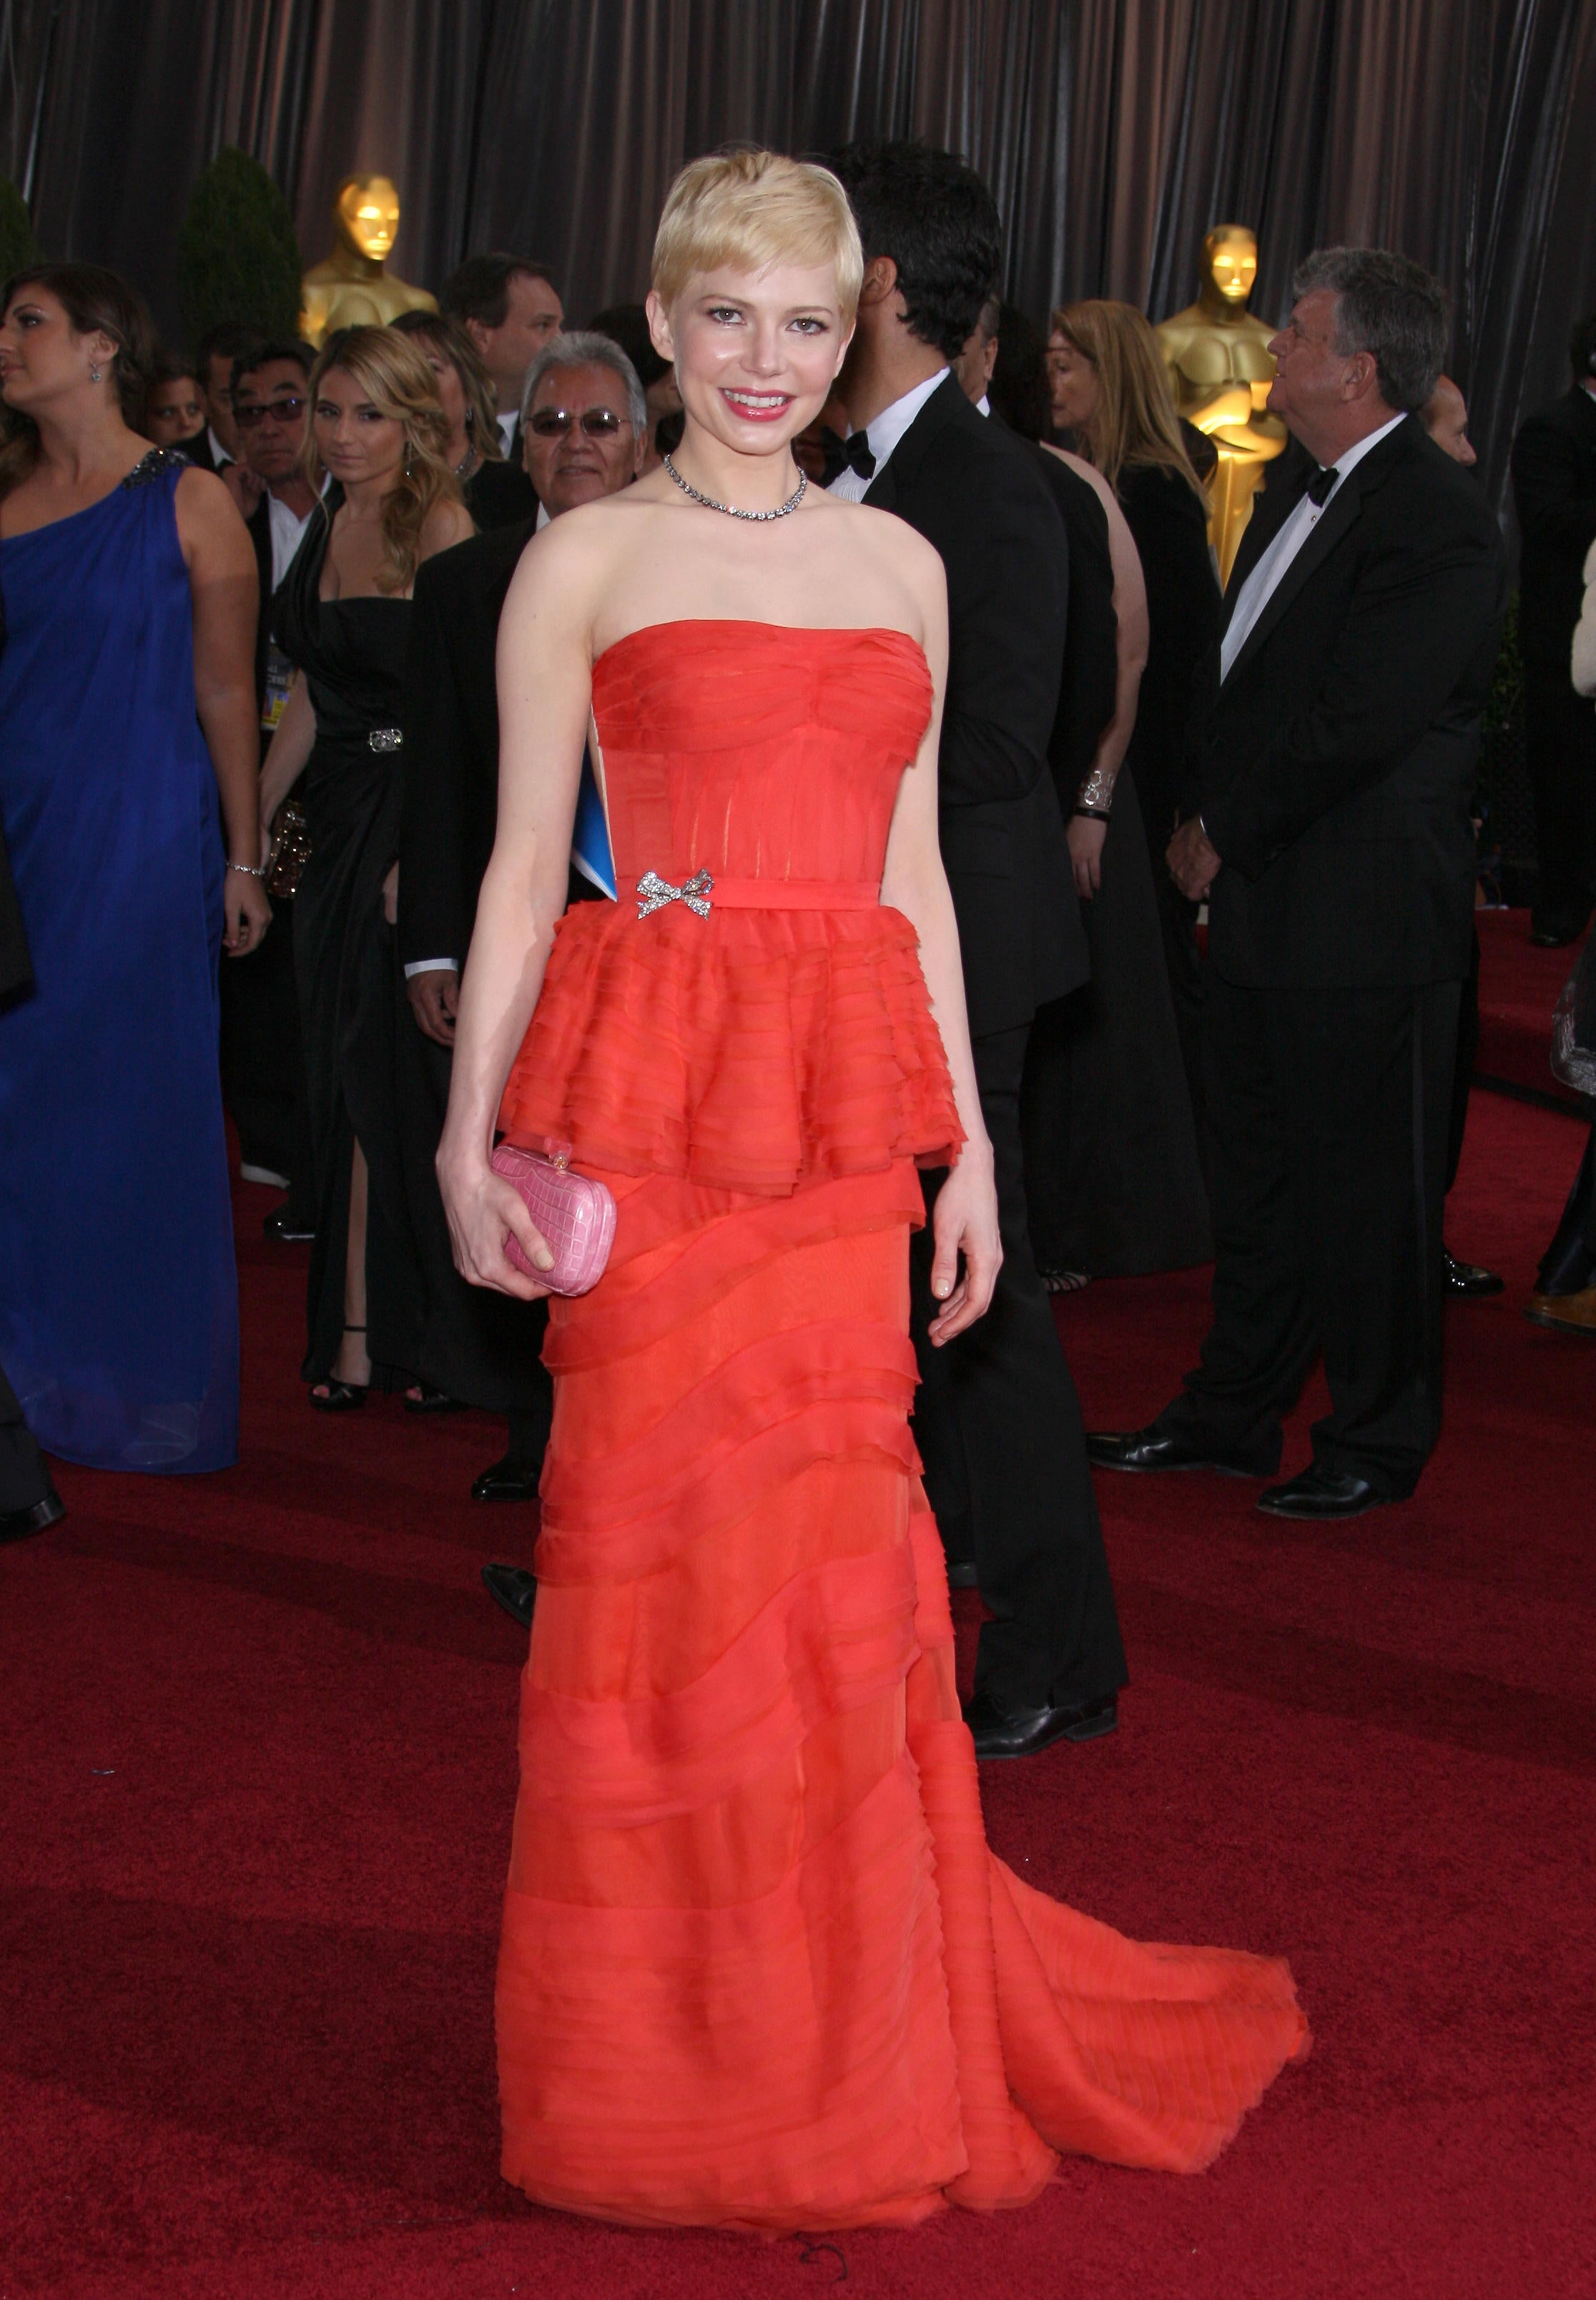 Michelle Williams at the 2012 Academy Awards (Alamy/PA)